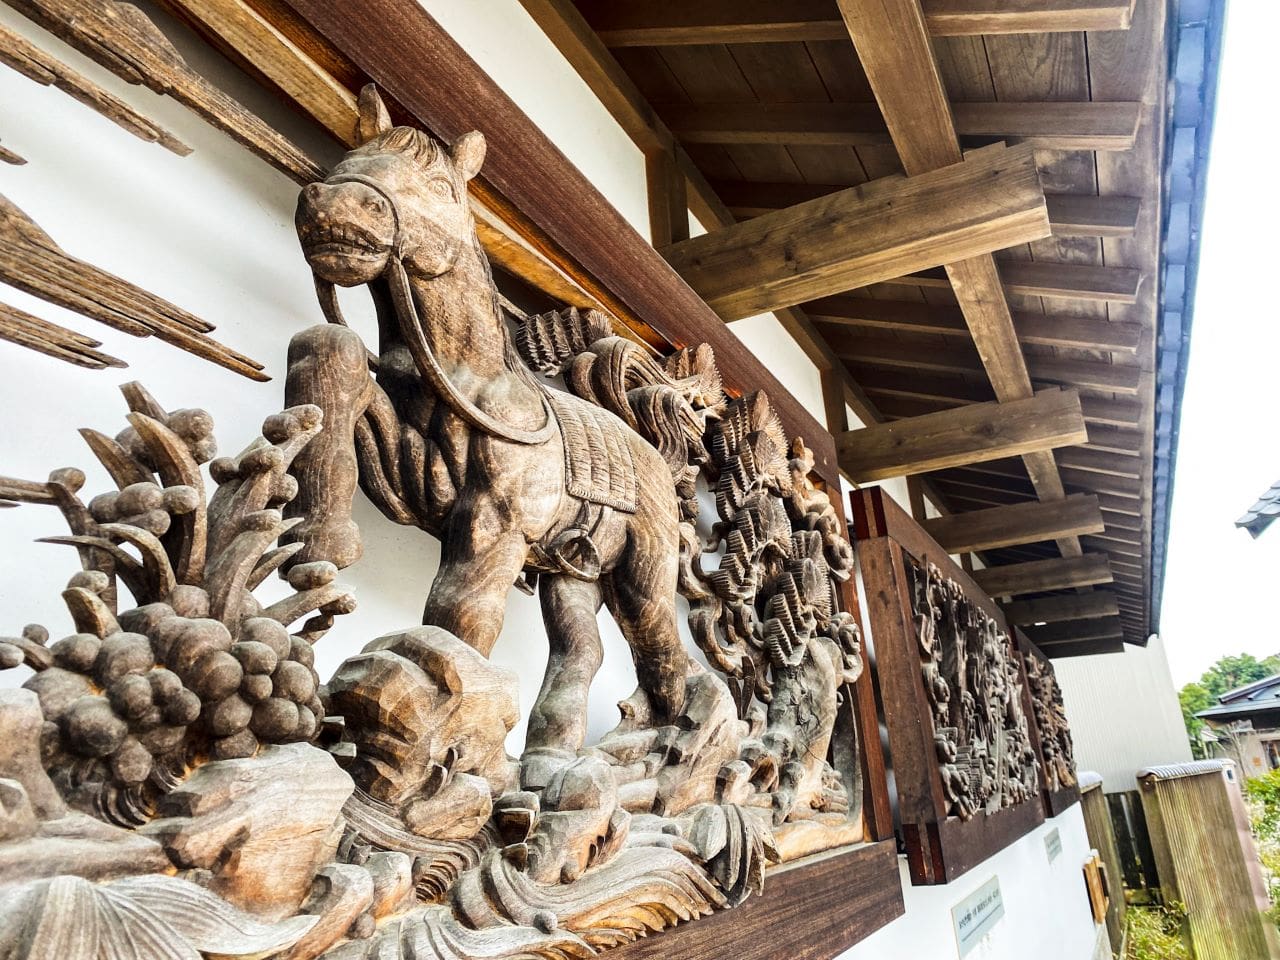 Wood carvings in Inami district